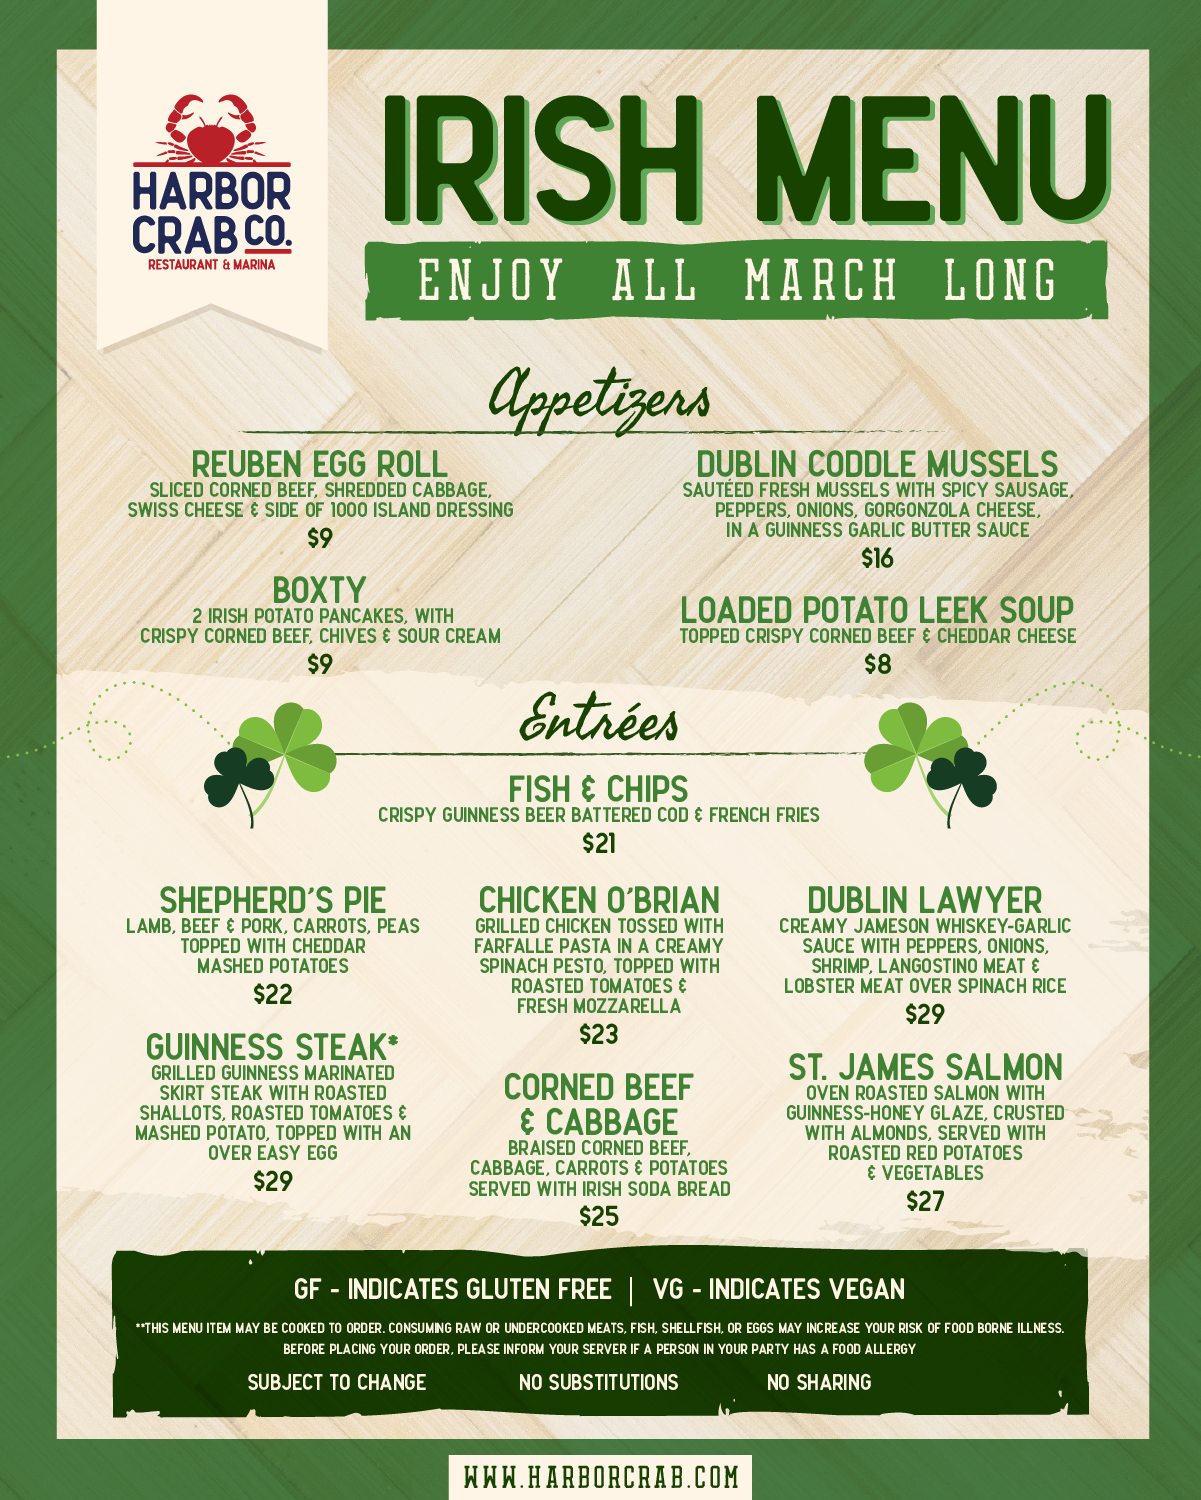 An Irish-themed menu from Harbor Crab featuring appetizers like Reuben Egg Roll and Dublin Coddle Mussels, and entrees such as Fish & Chips, Shepherd's Pie, and Guinness Steak, with a note that GF indicates gluten-free options, VG indicates vegan, and advising customer discretion for food allergies.